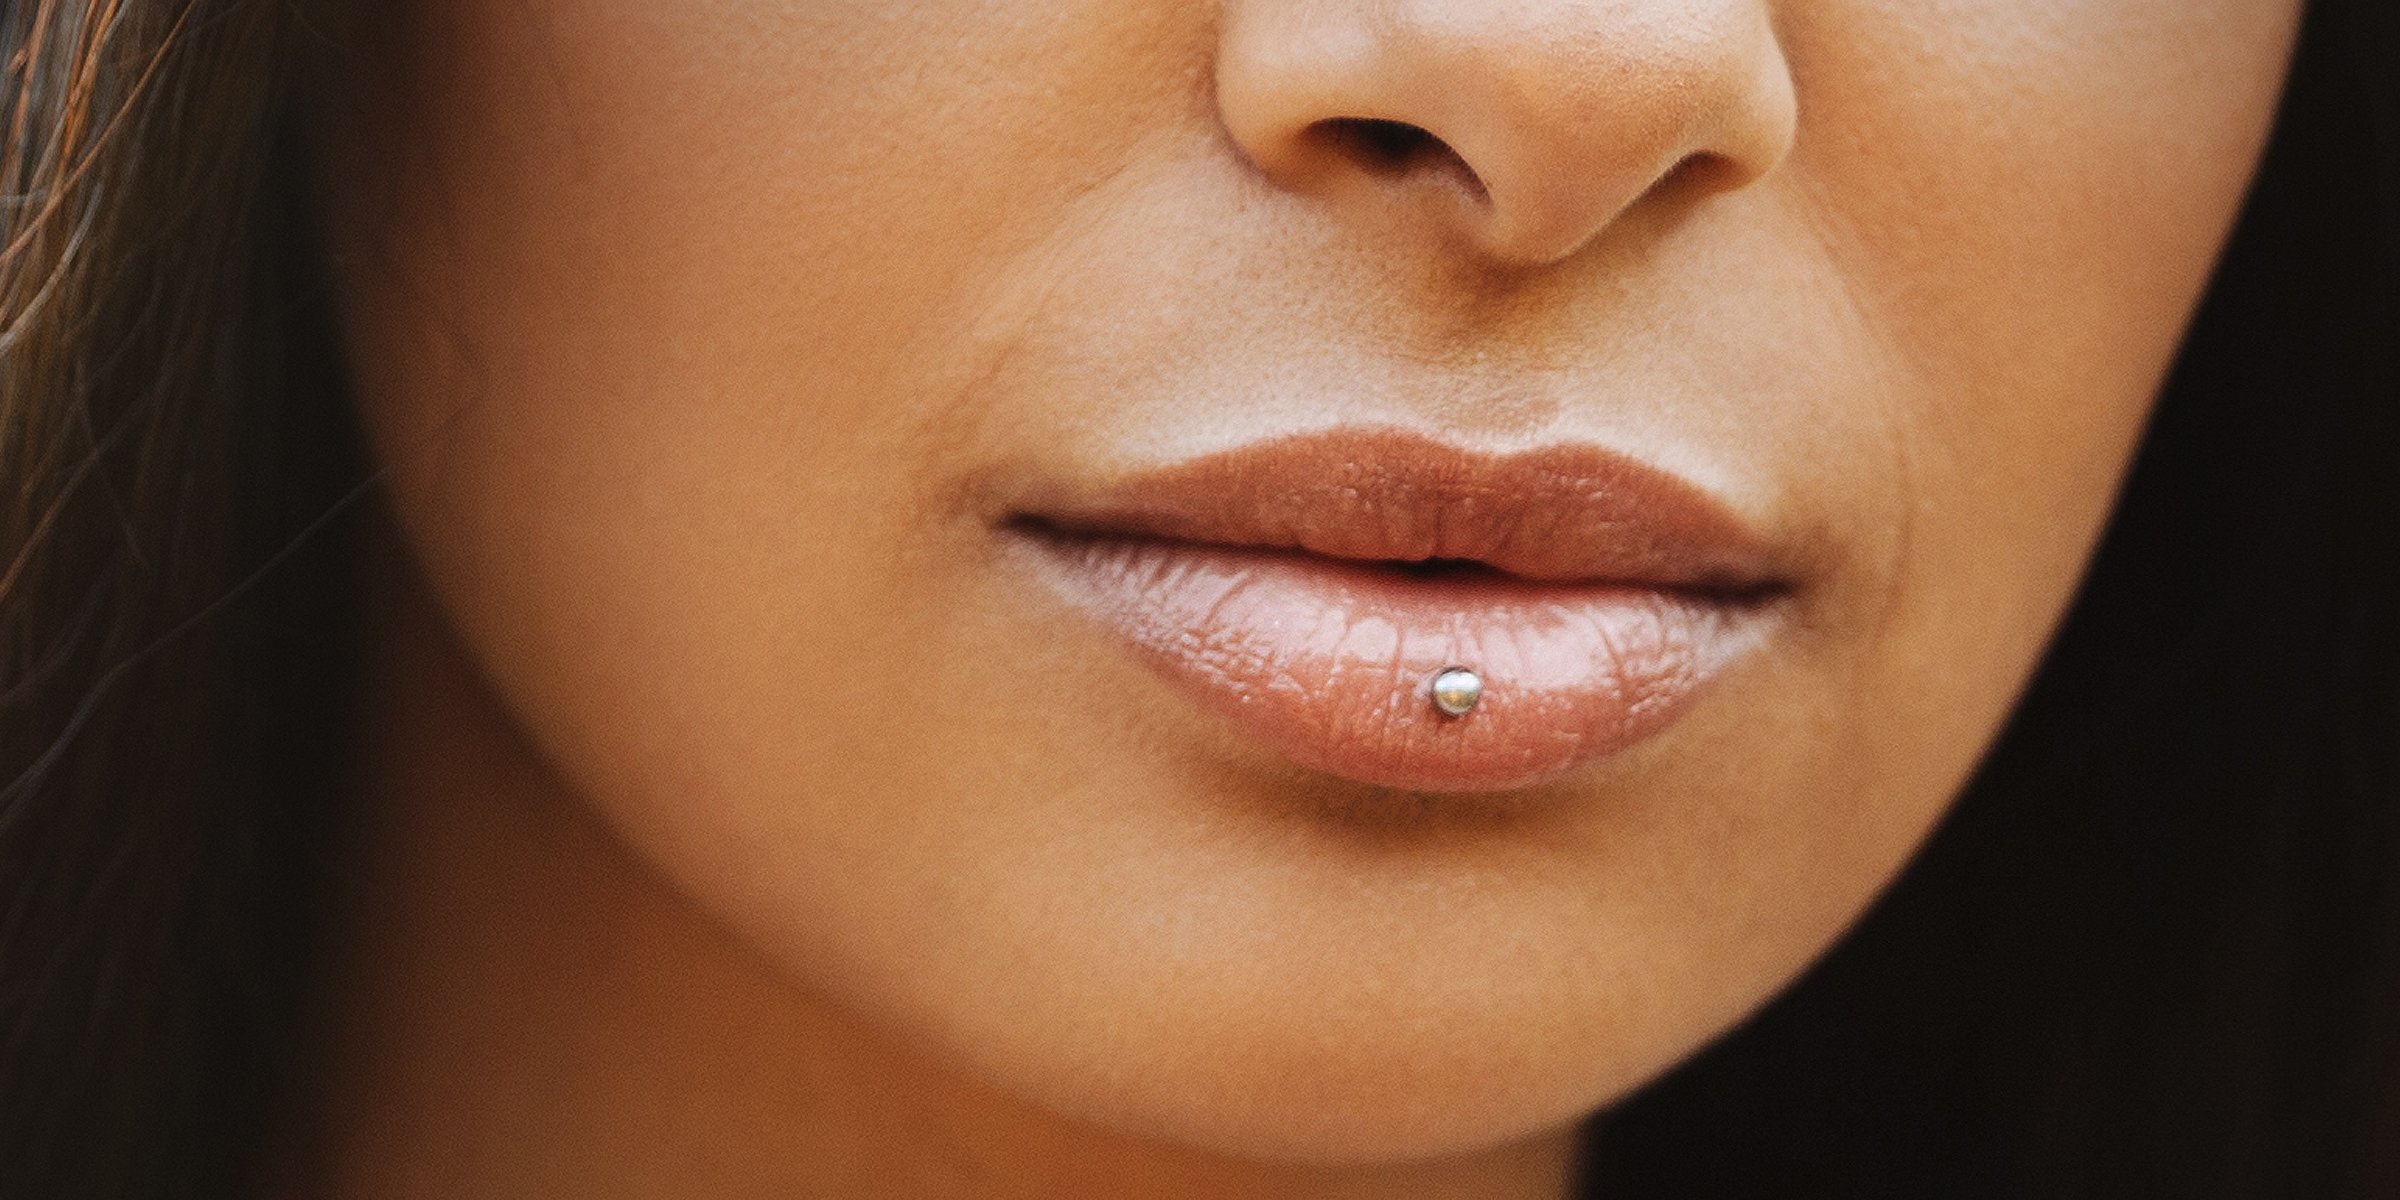 A Close-up Photo of a Woman with an Ashley Piercing | Source: Shutterstock